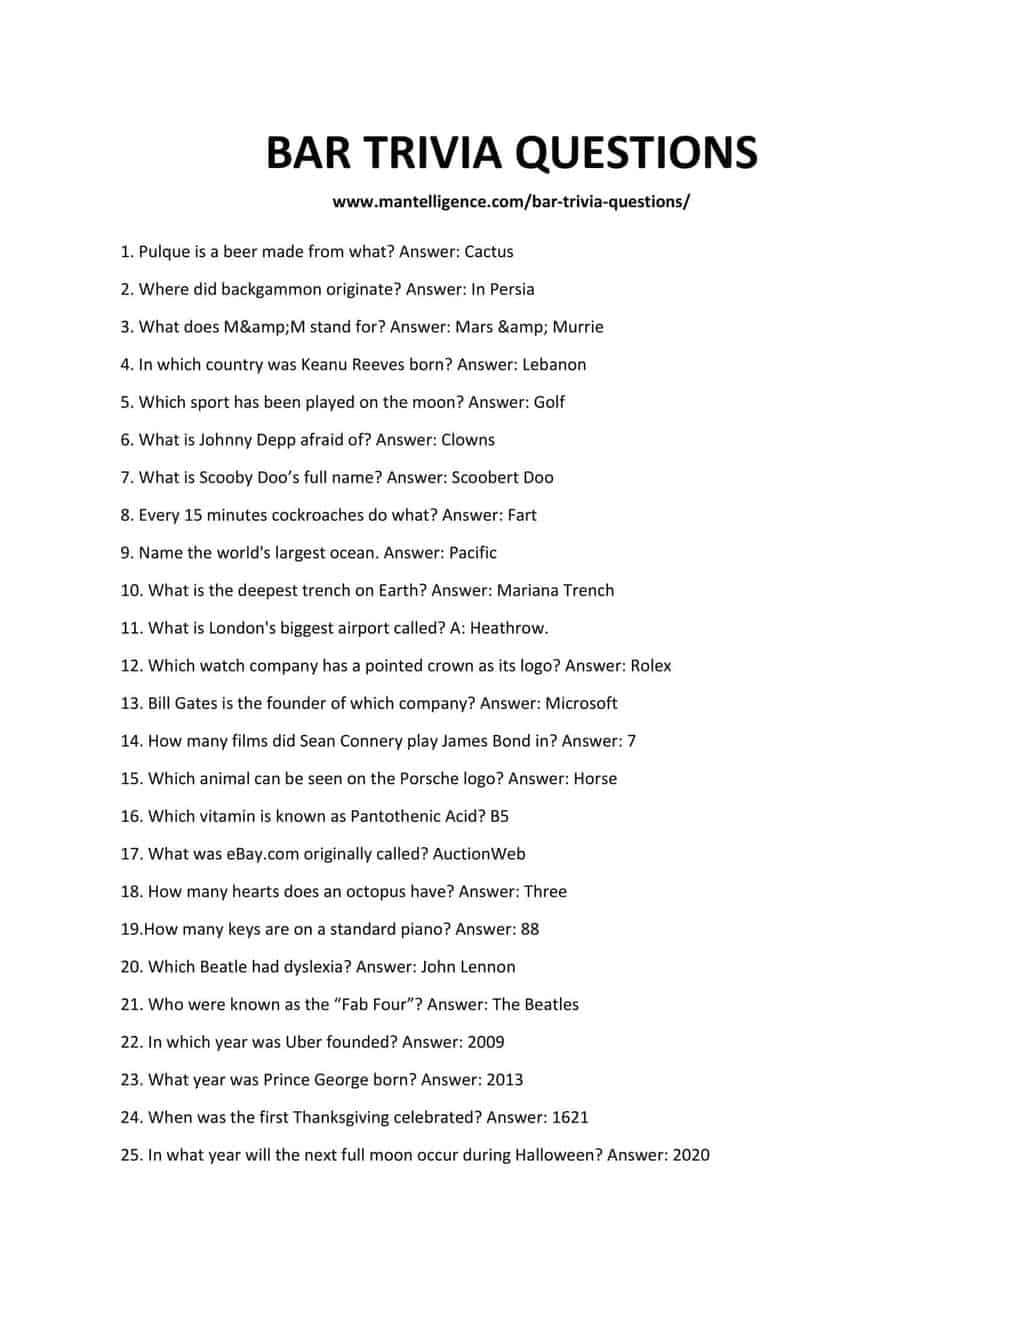 Trivia Questions For Work Meetings: 60 Fun Options